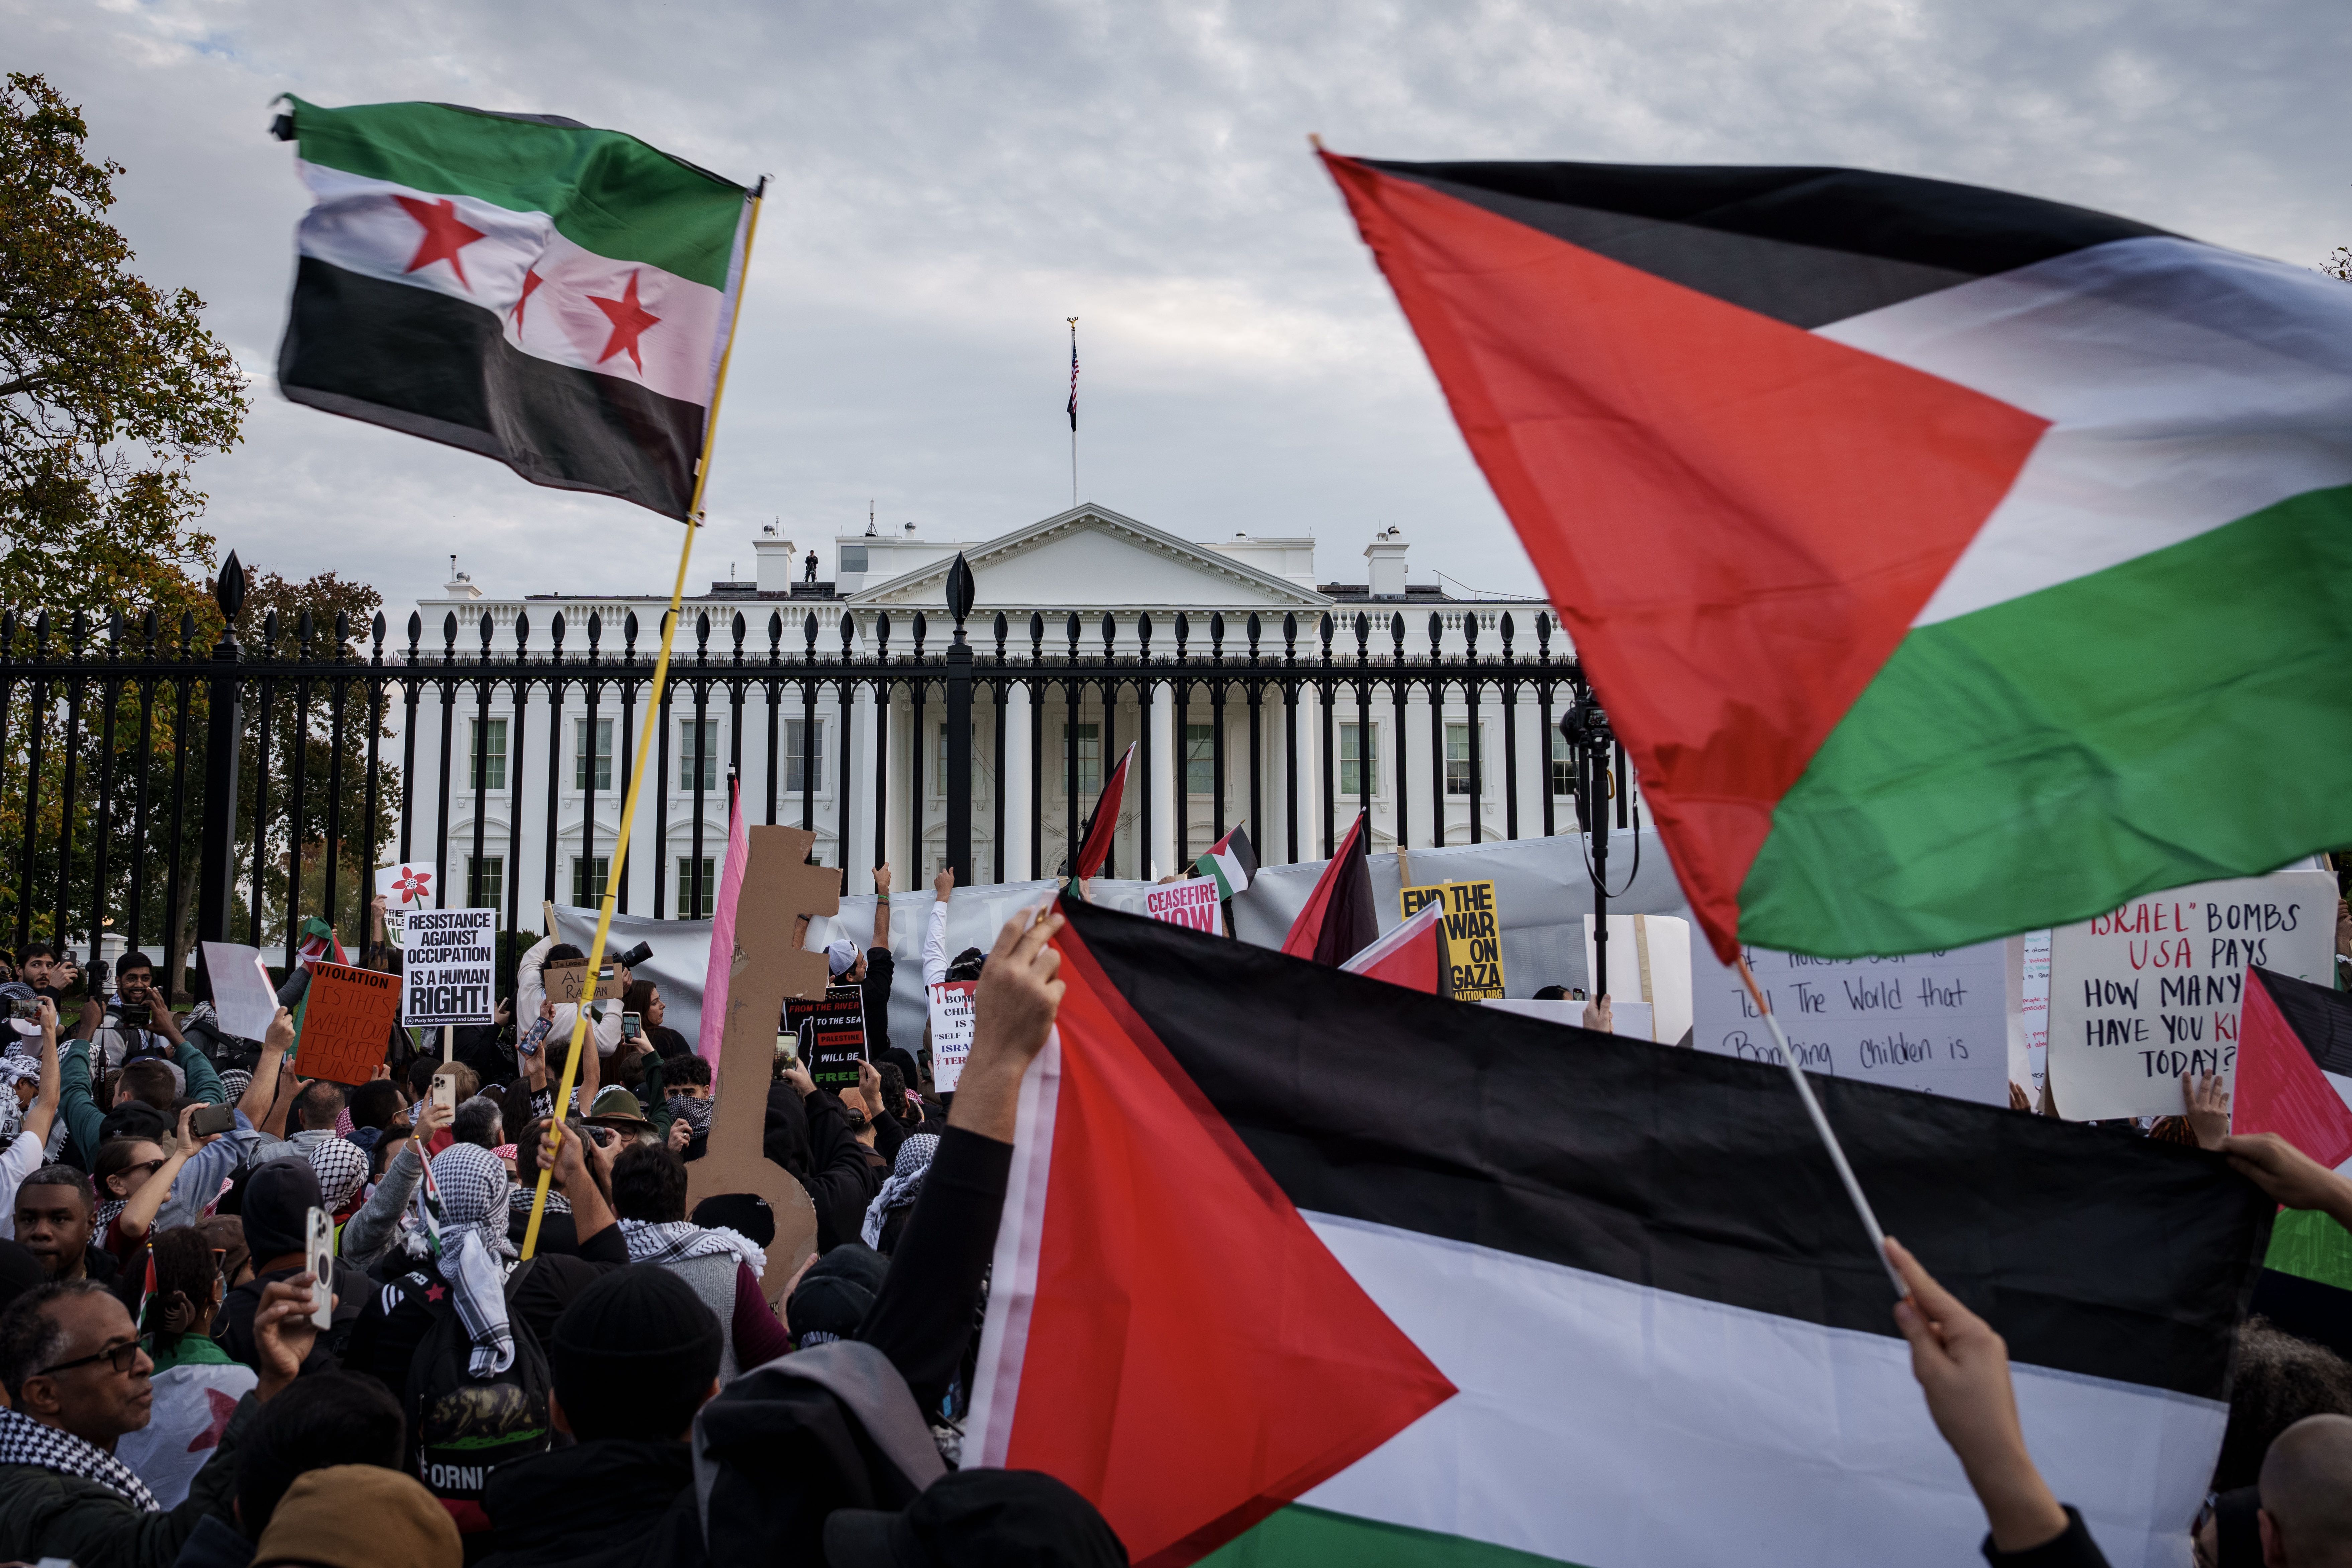 Protesters outside White House demand Gaza ceasefire.